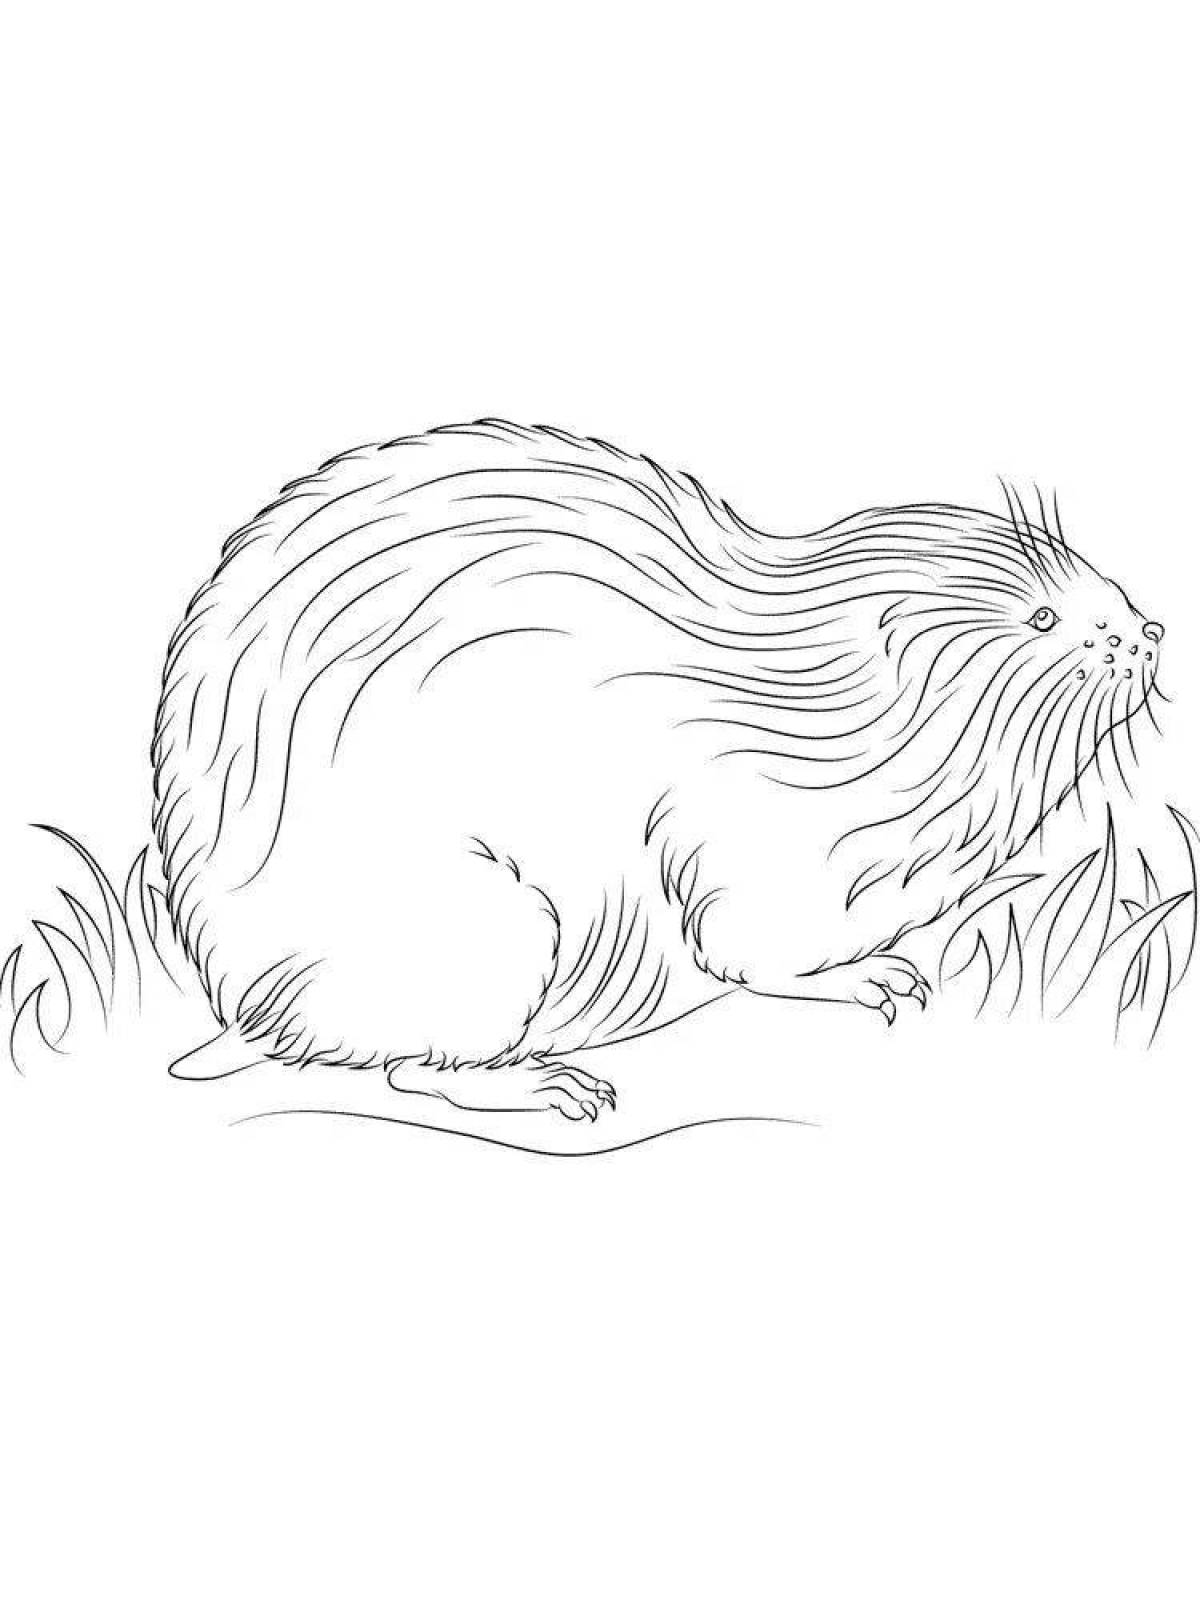 Coloring page energetic lemming